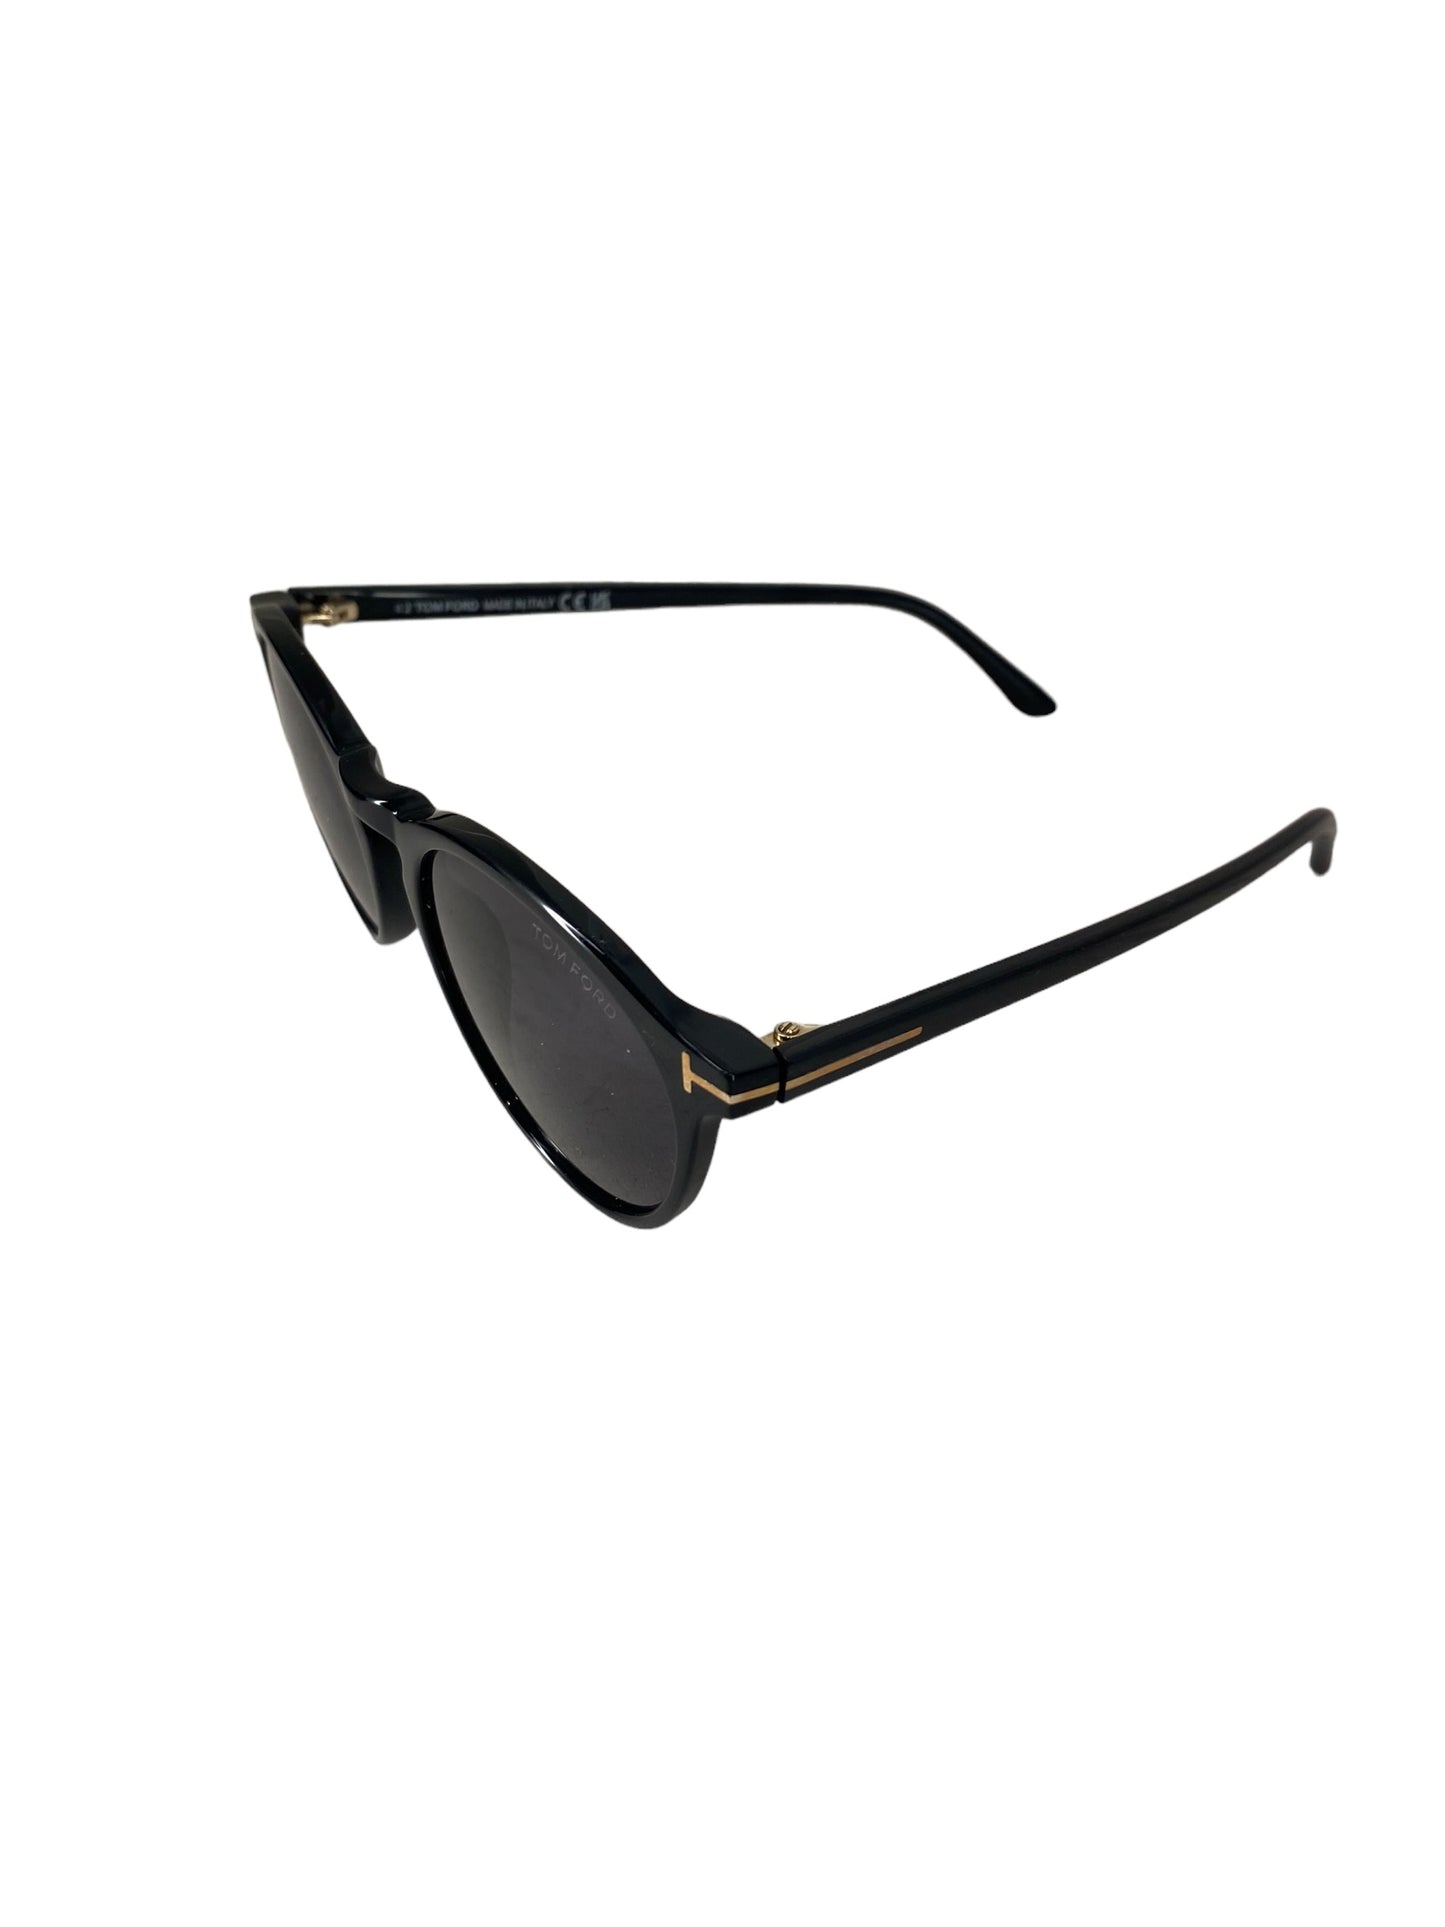 Sunglasses By Tom Ford